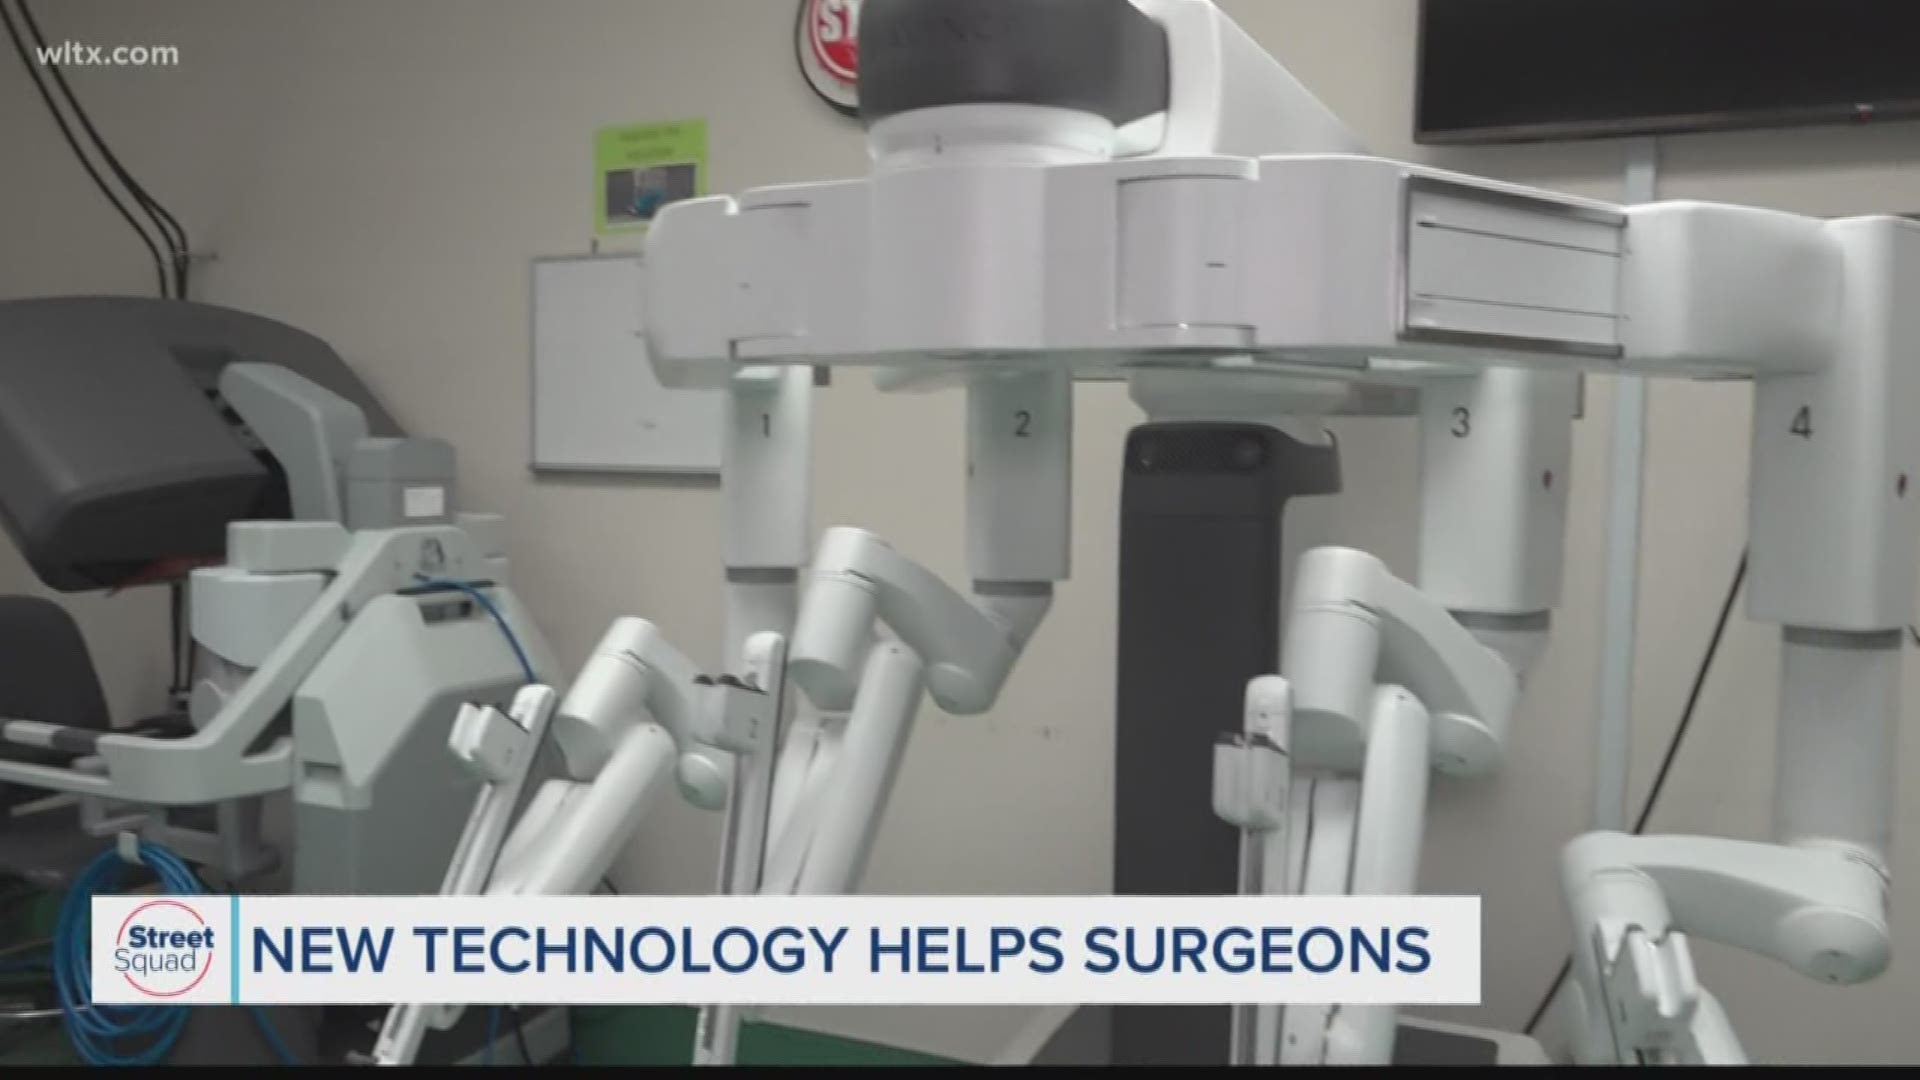 Prisma Health Tuomey Hospital has added robotic assisted surgical technology as an option to assist patients.